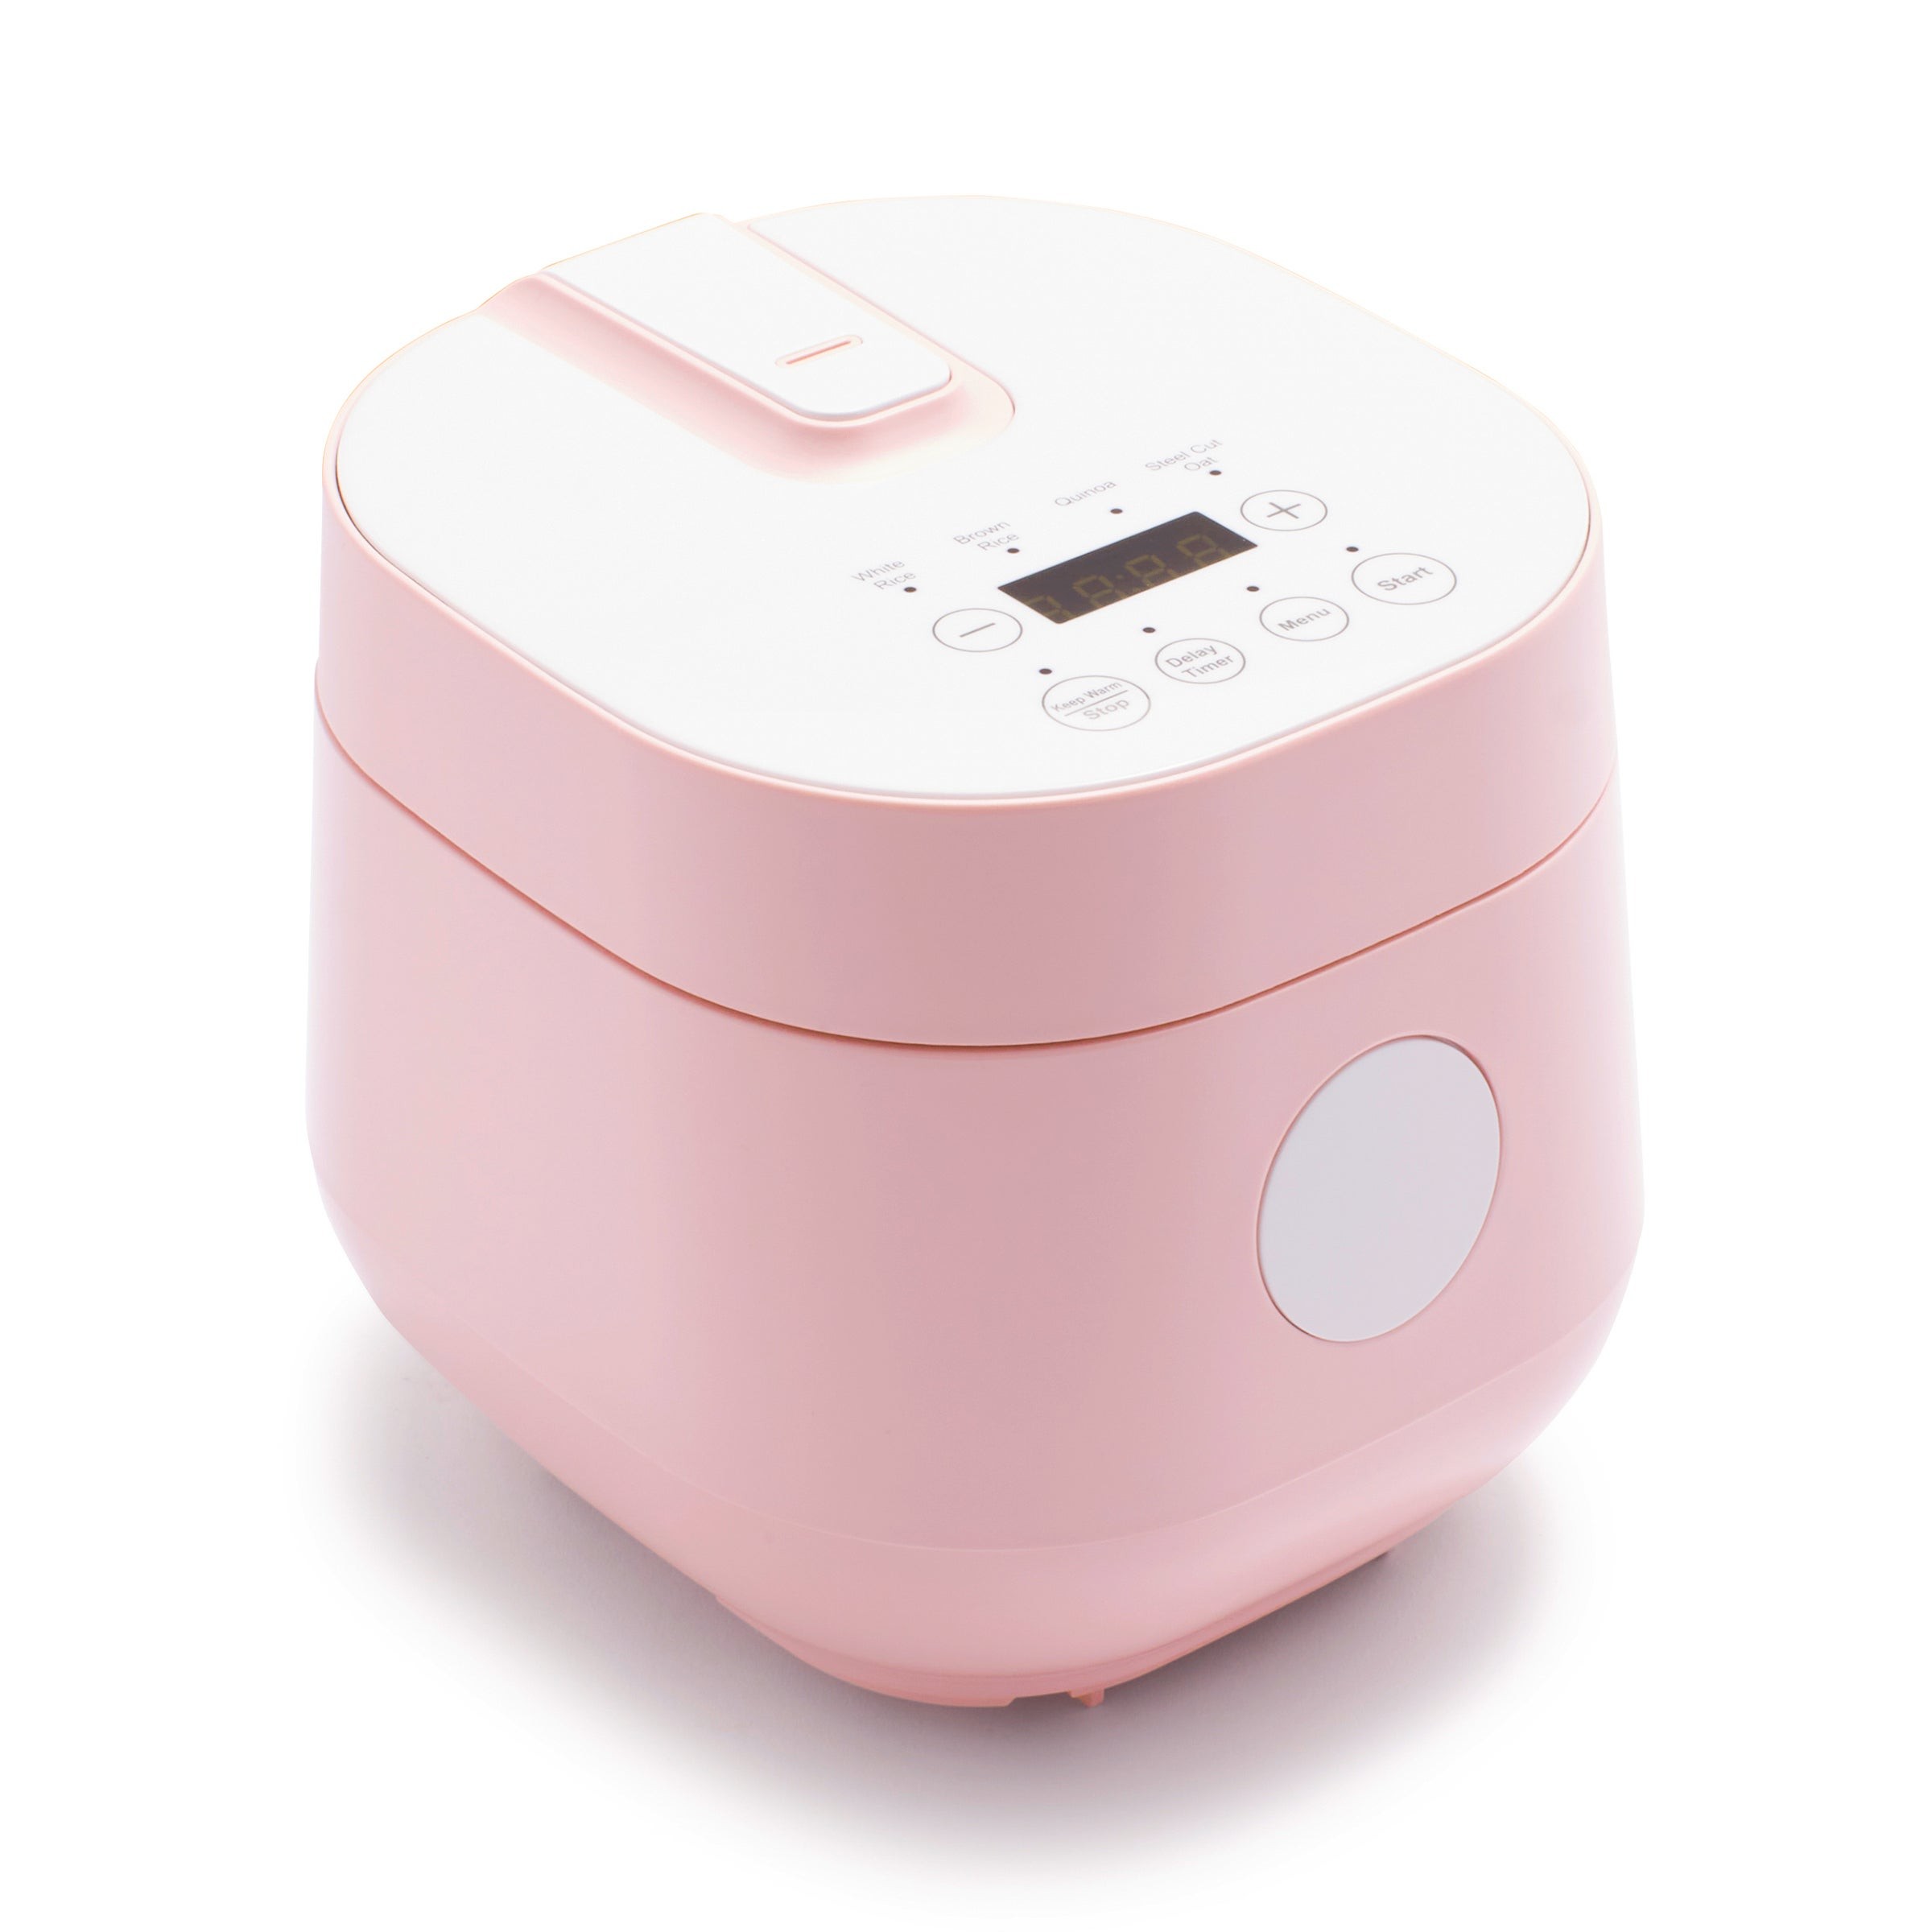 Go Grains Healthy Ceramic Rice Cooker Pink